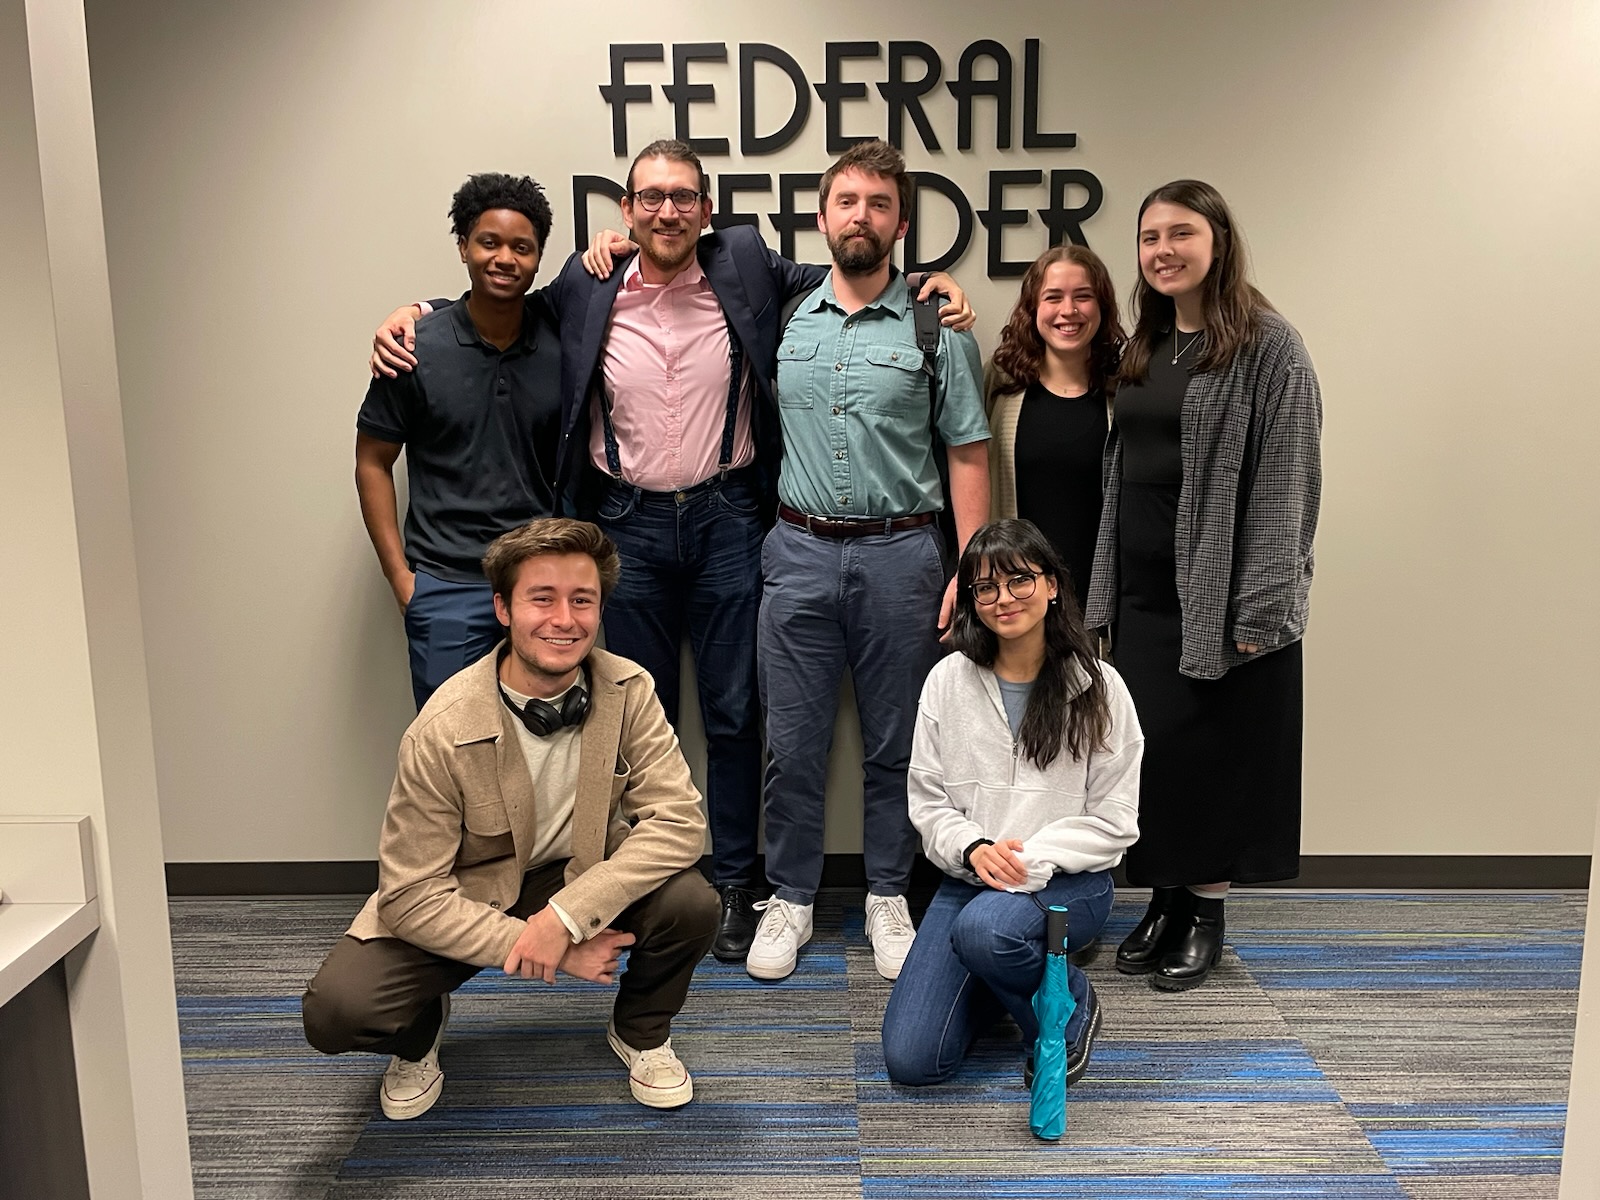 St. John's Law students who volunteered at Federal Defender.